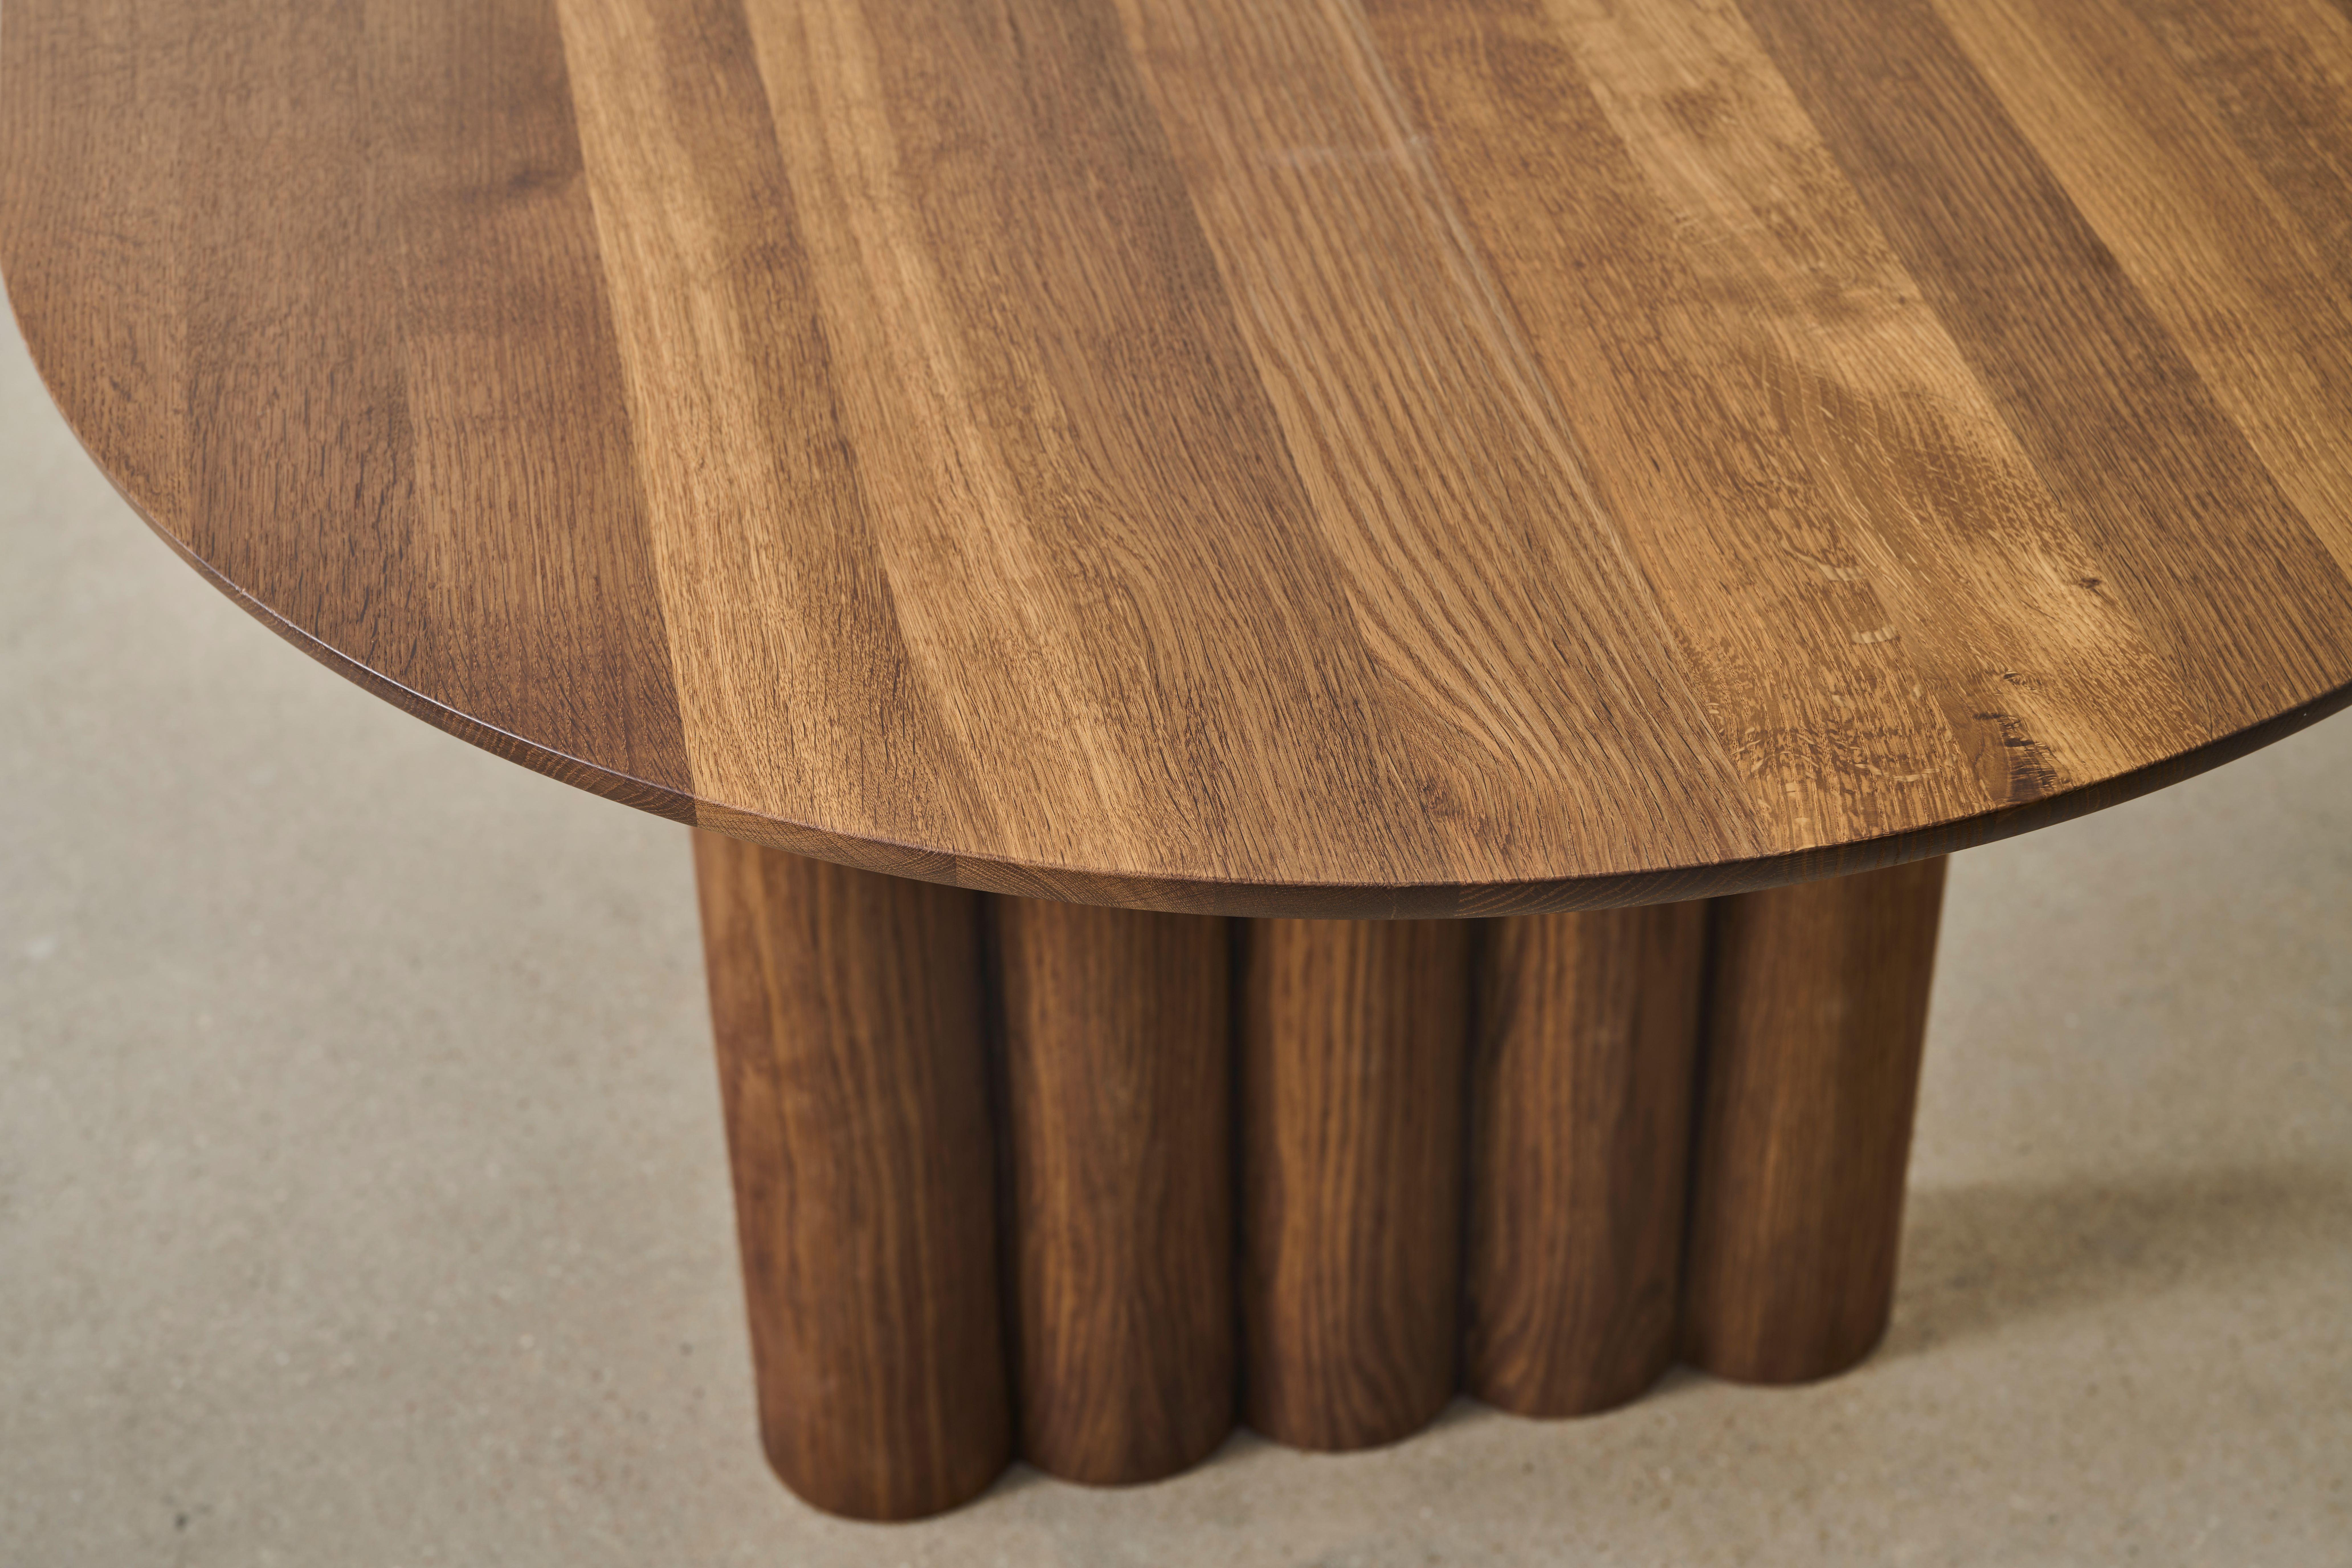 Danish Contemporary Dining Table 'Plush' by Dk3, Smoked Oak or Walnut, 270 For Sale